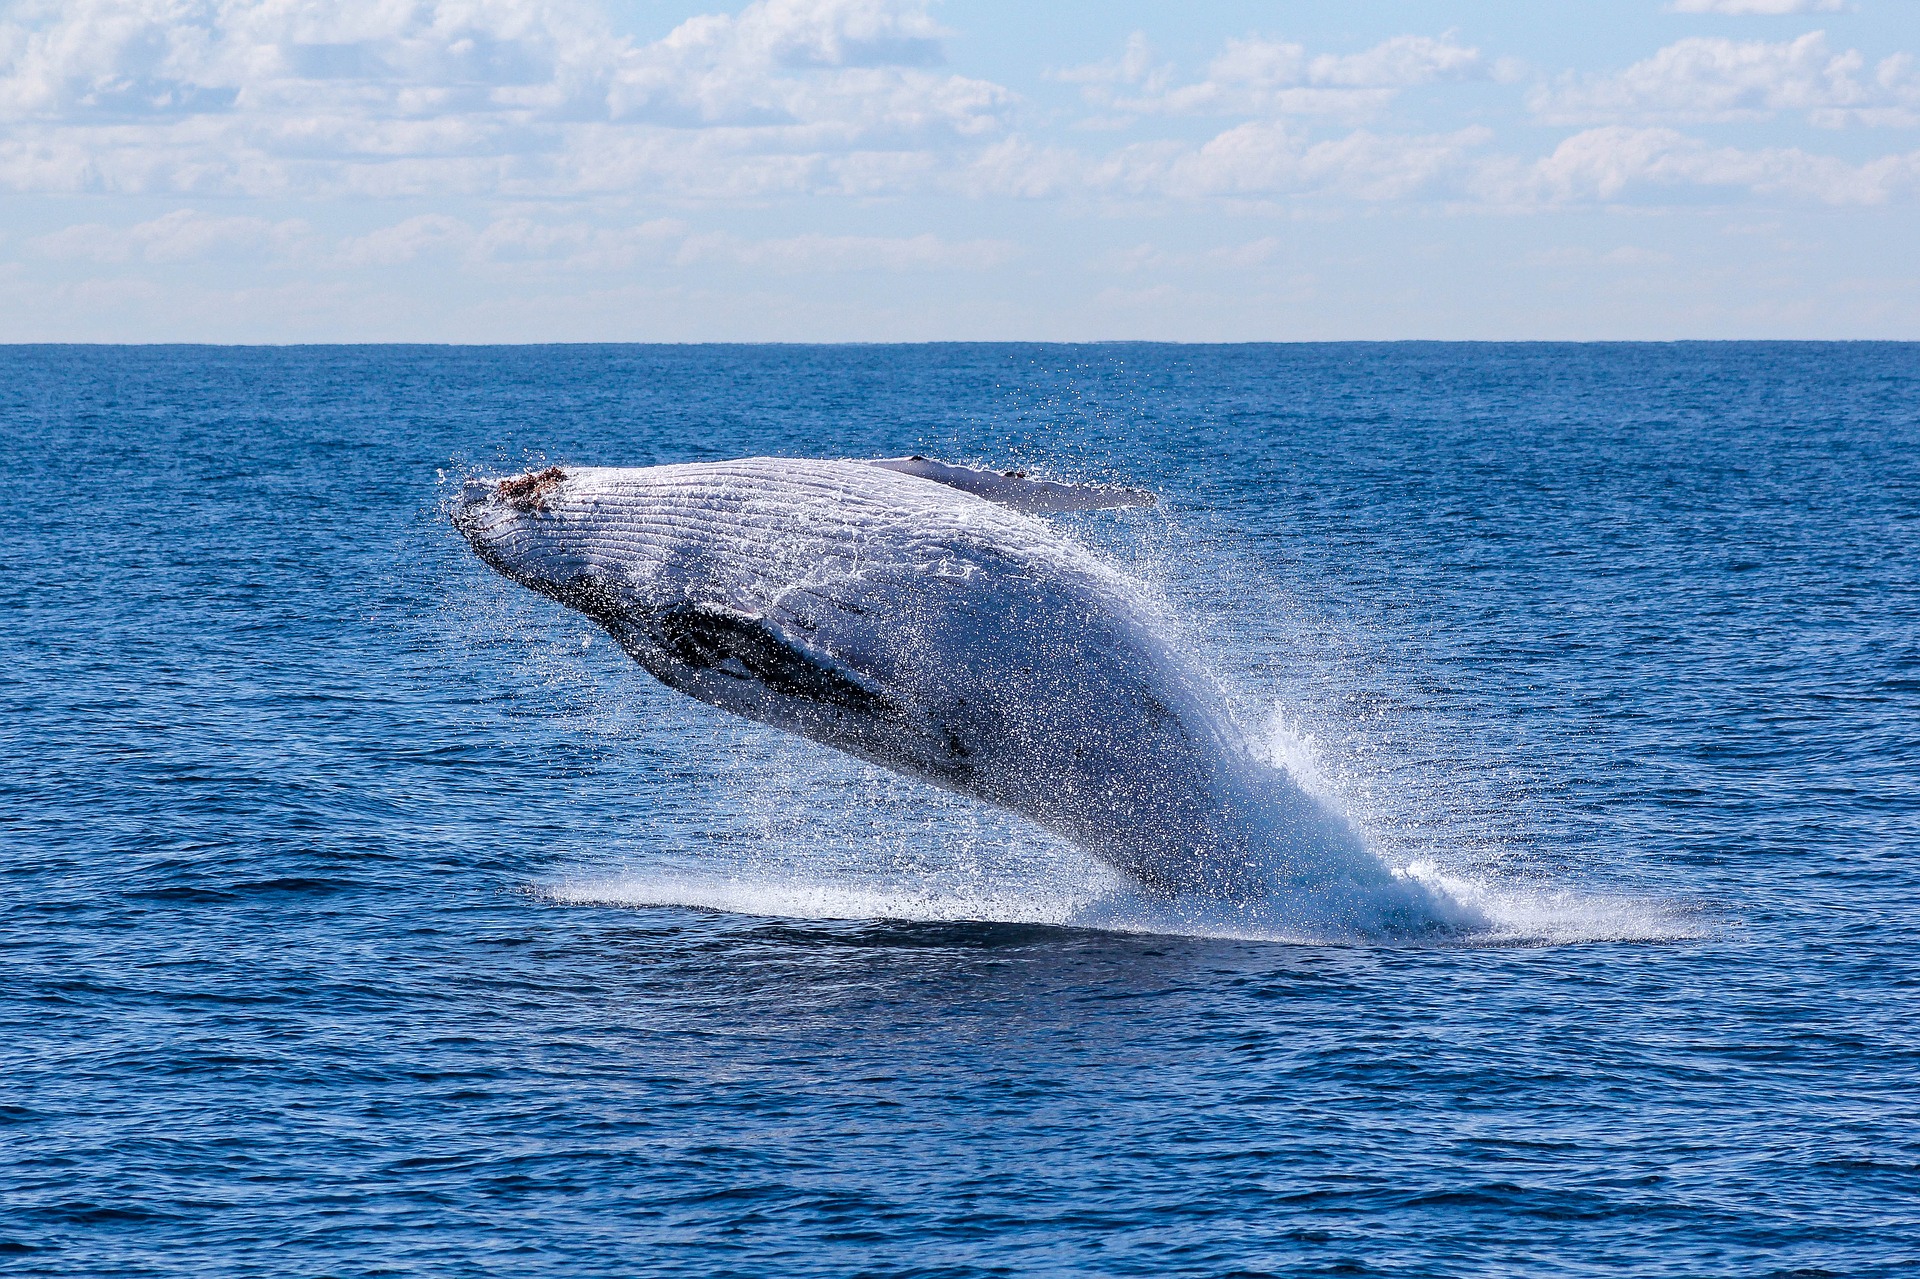 “Whaling” email attacks: How to foil them